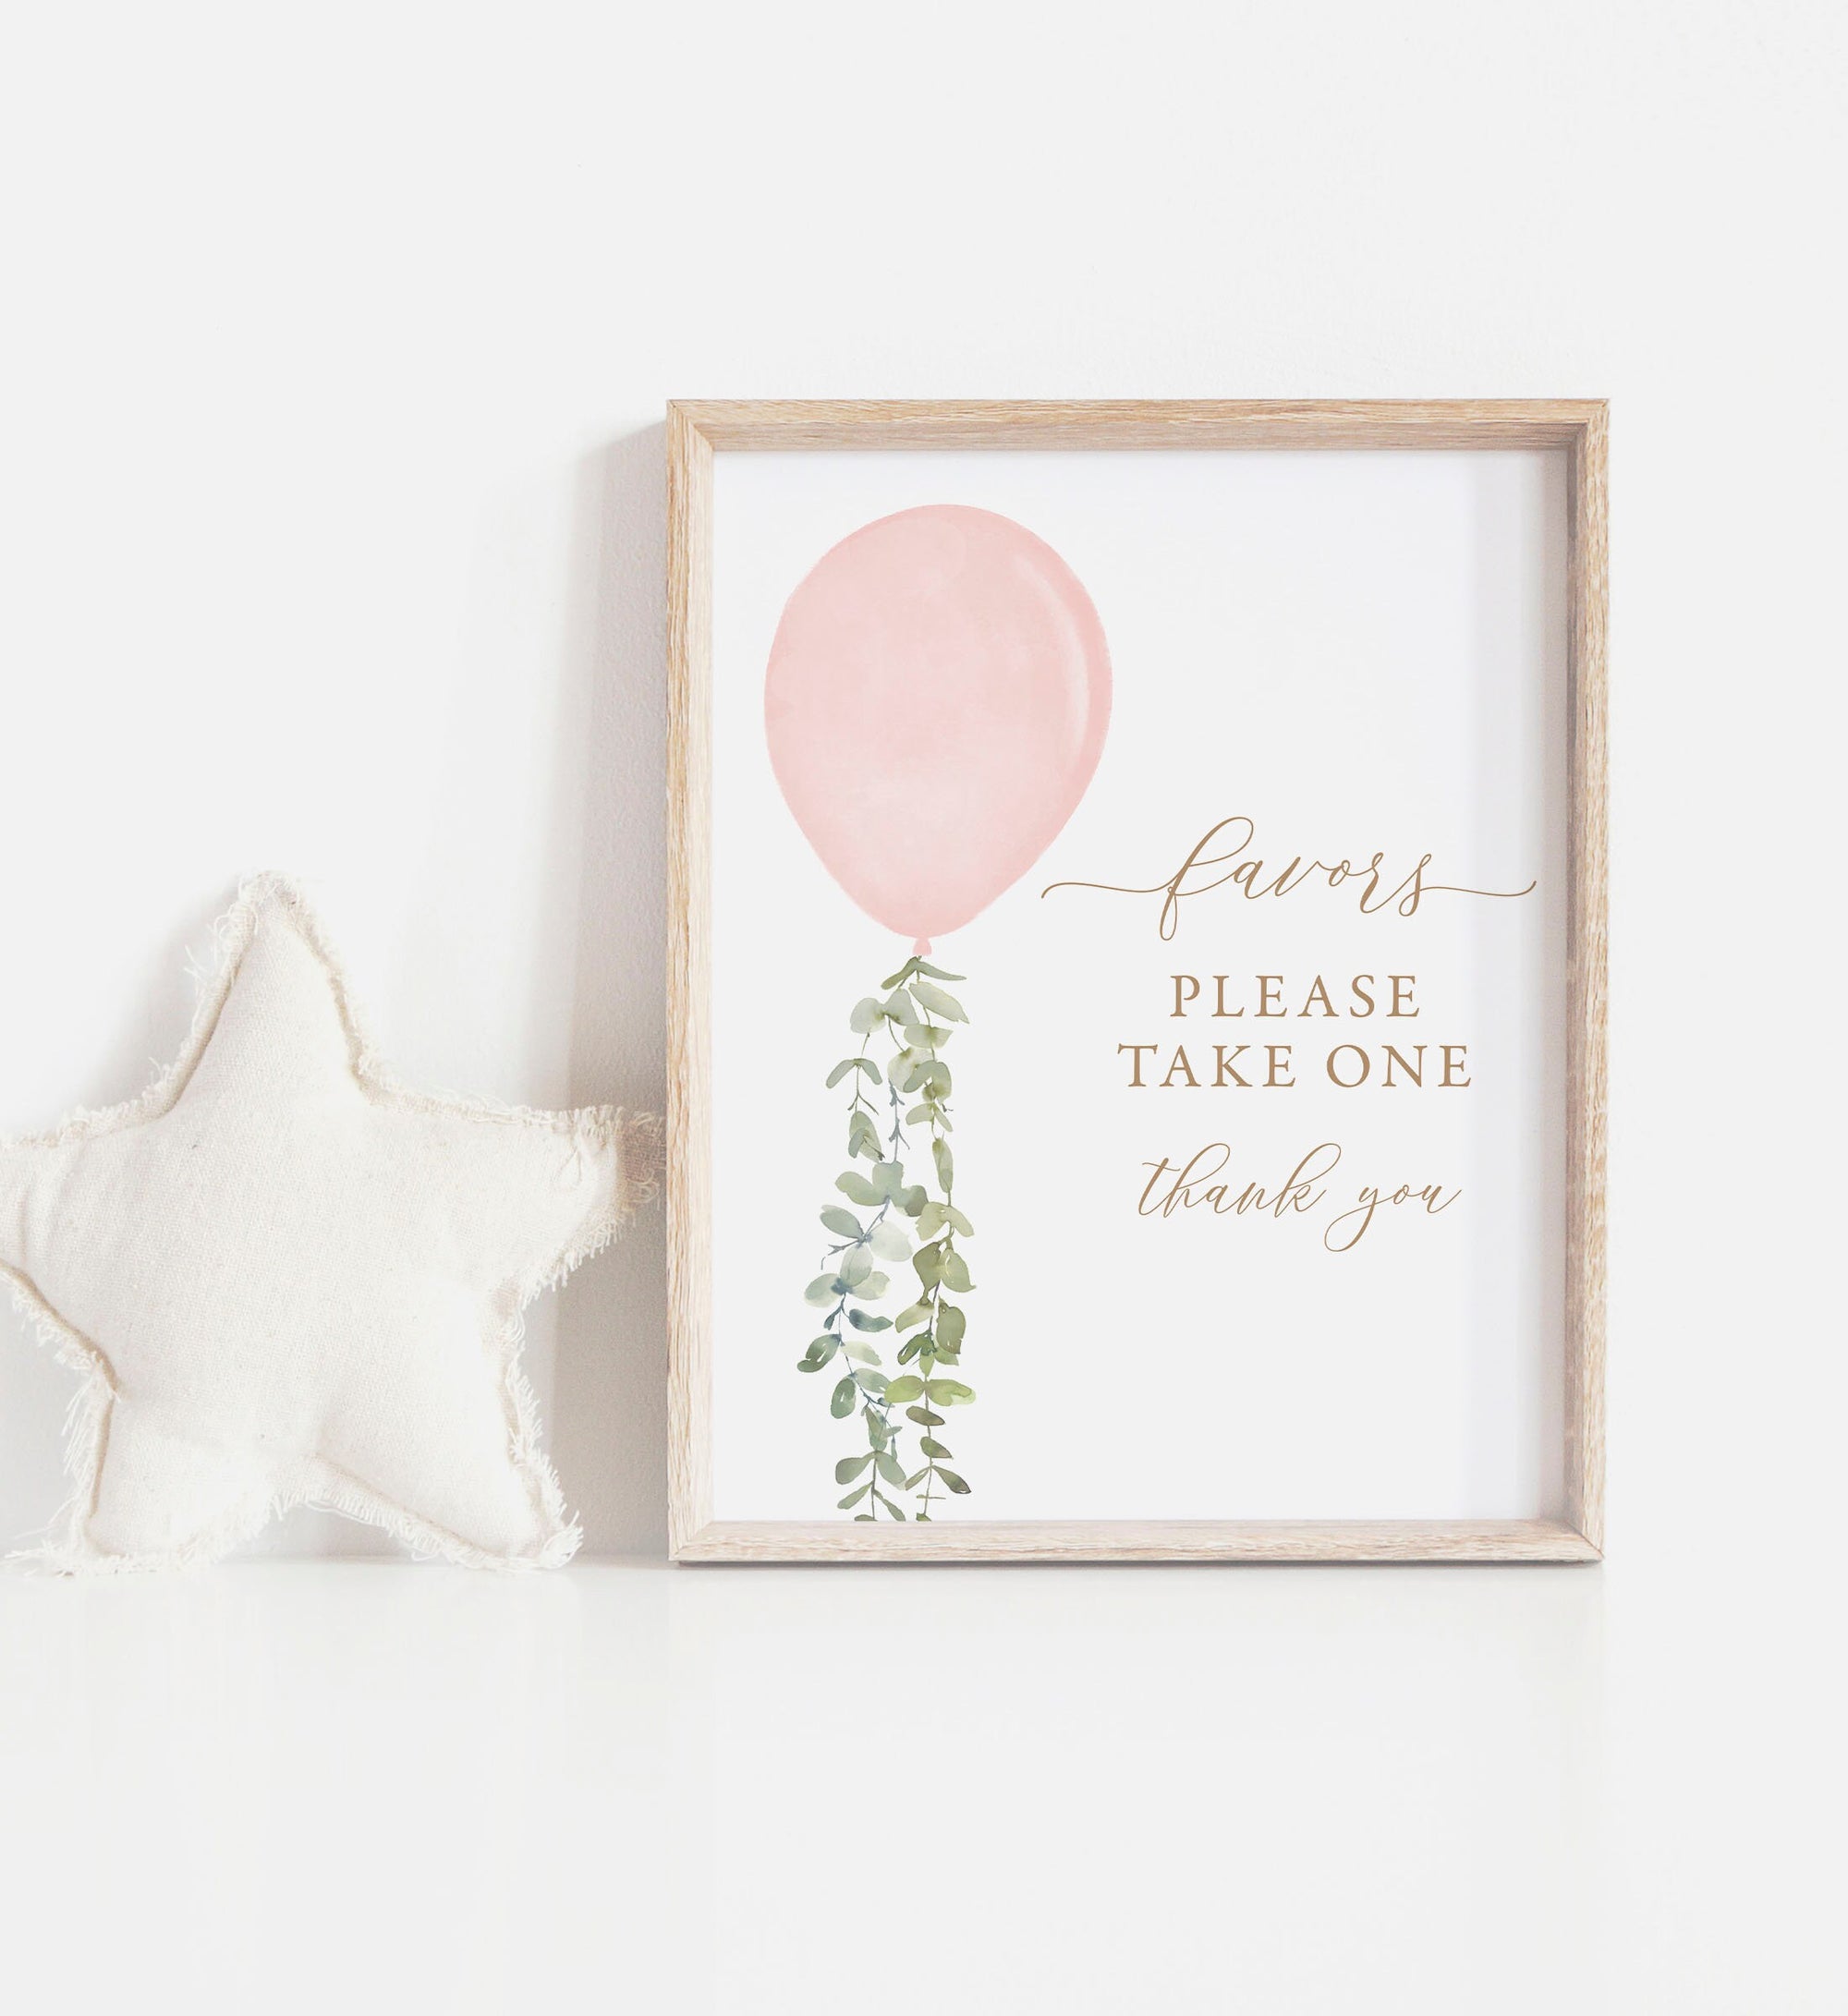 Pink Balloon Baby Shower Favors Sign, Printable Watercolor Balloon Favors Please Take One Sign, DIGITAL DOWNLOAD